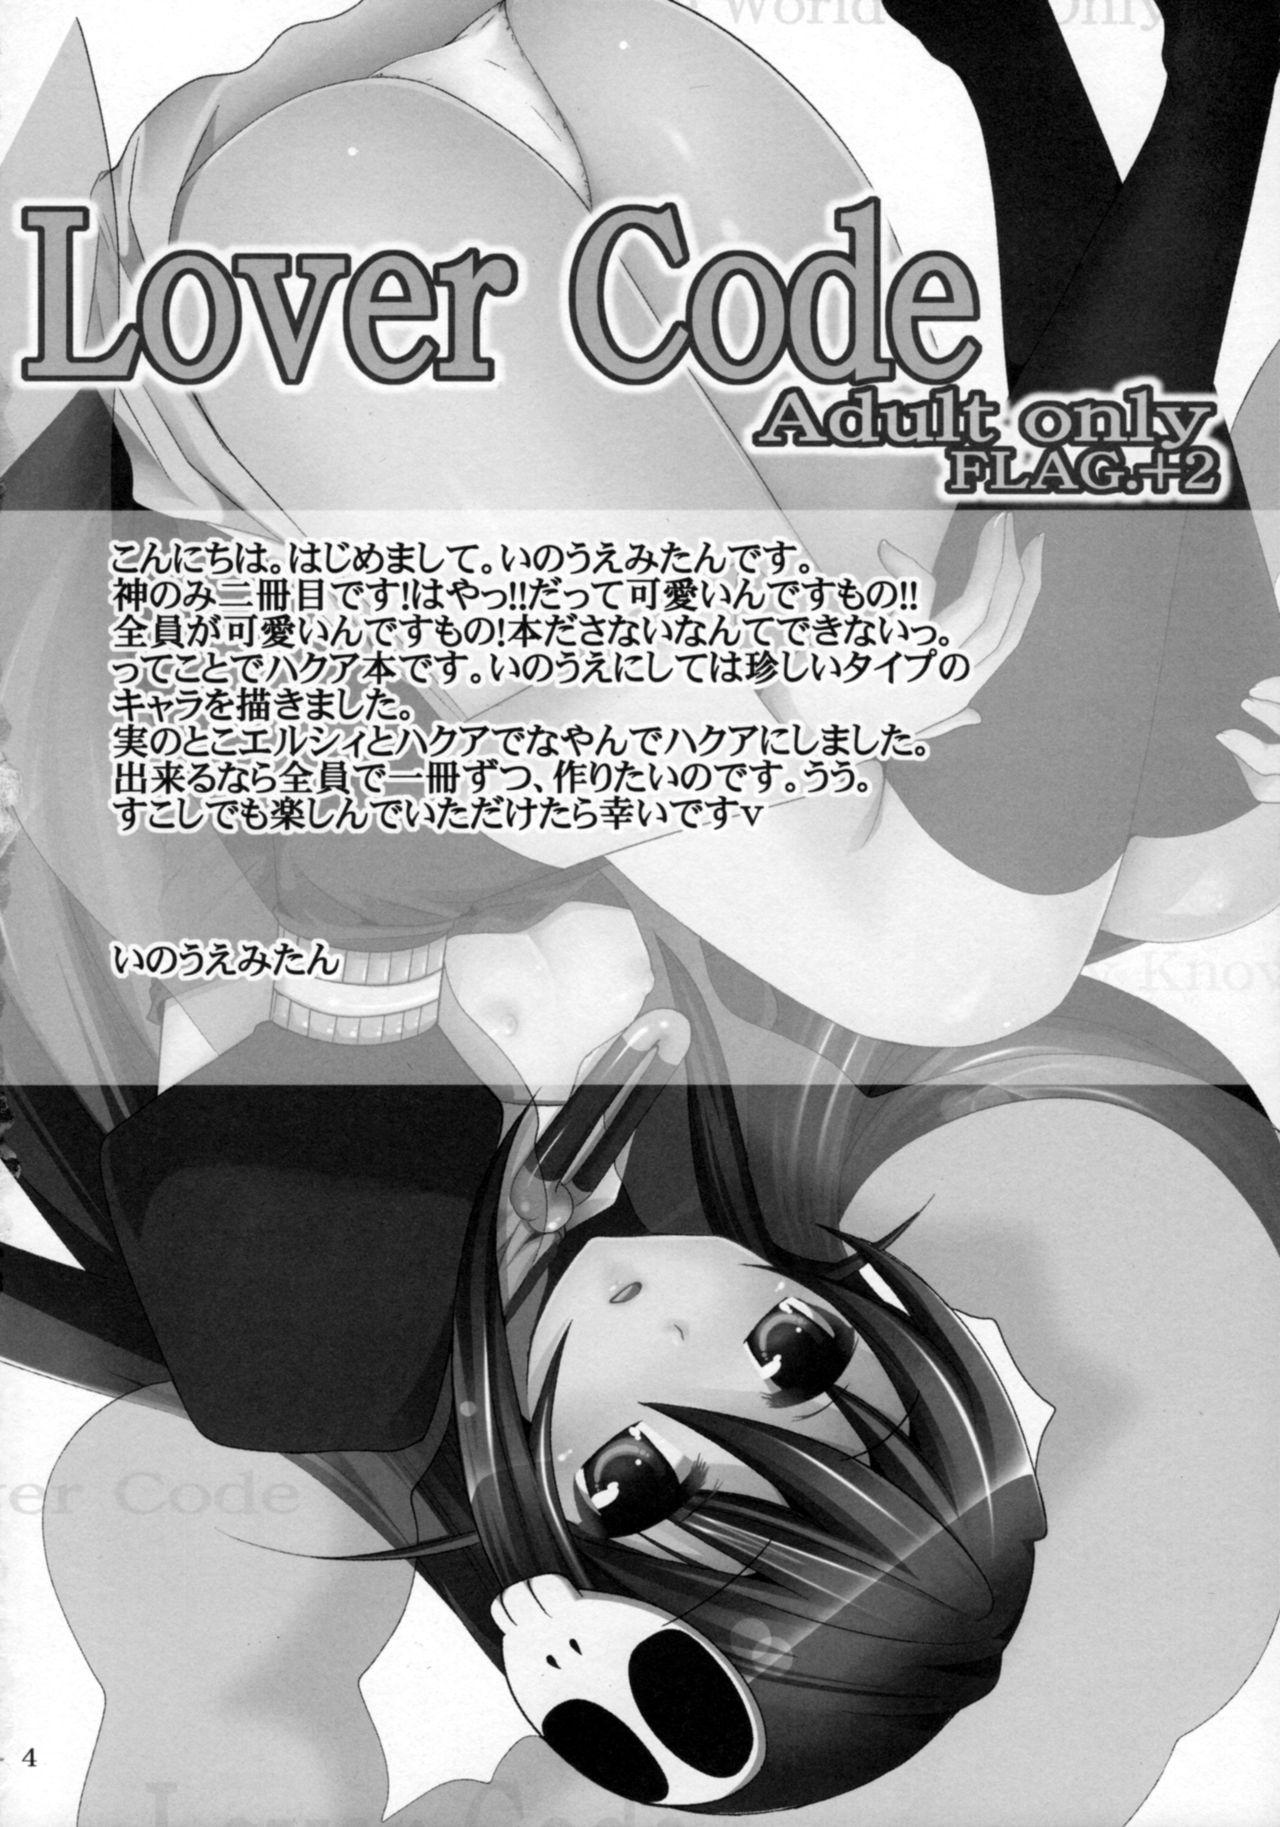 Bikini Lover Code - The world god only knows Pov Sex - Page 3